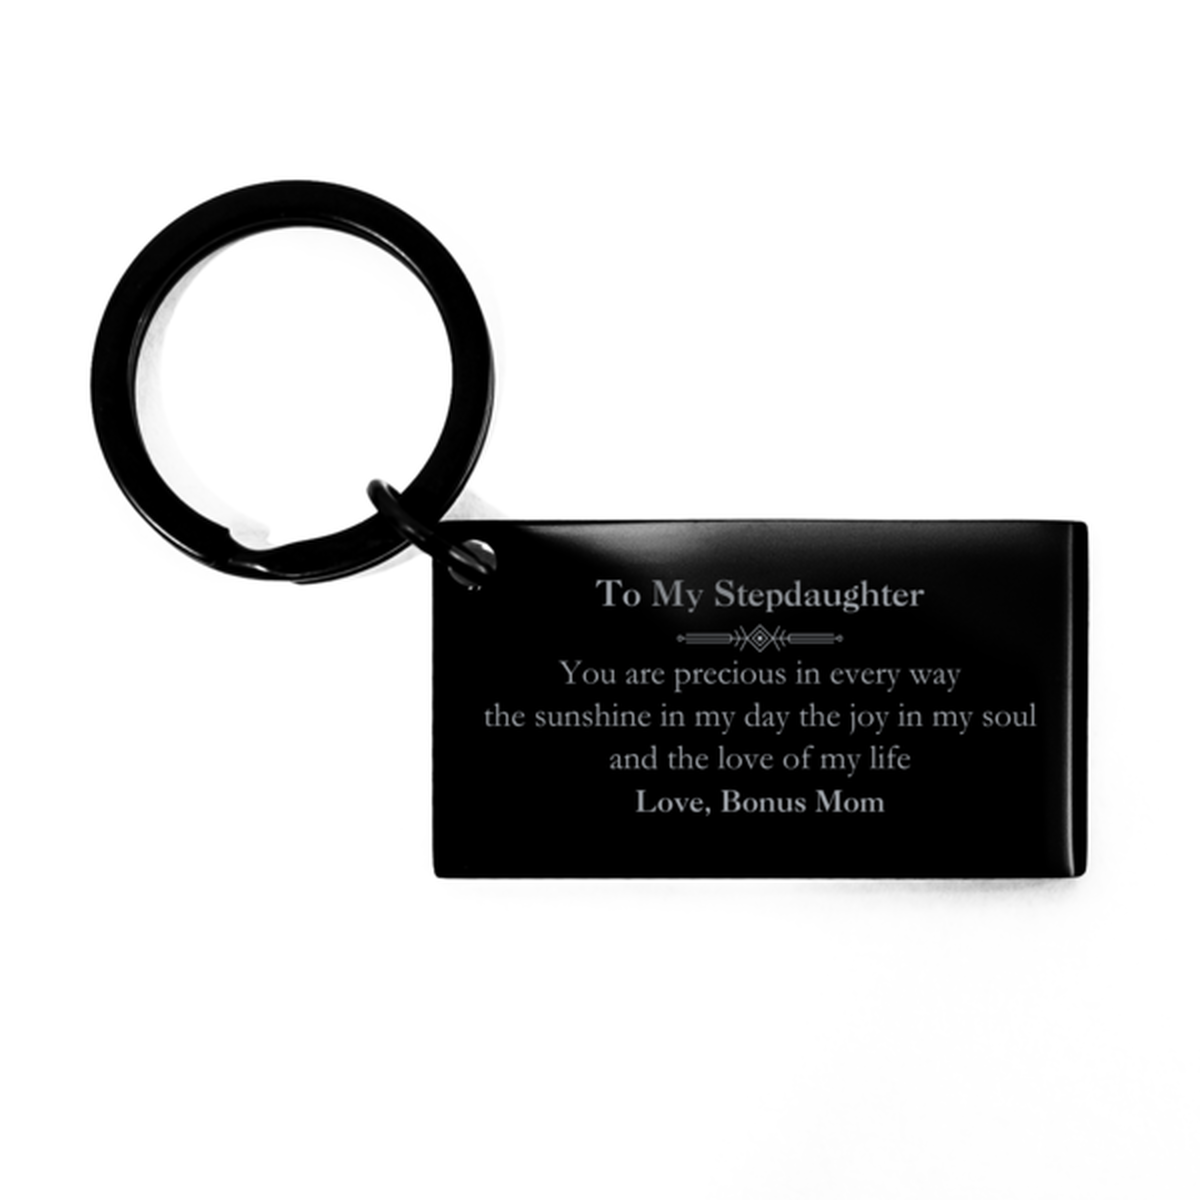 Graduation Gifts for Stepdaughter Keychain Present from Bonus Mom, Christmas Stepdaughter Birthday Gifts Stepdaughter You are precious in every way the sunshine in my day. Love, Bonus Mom